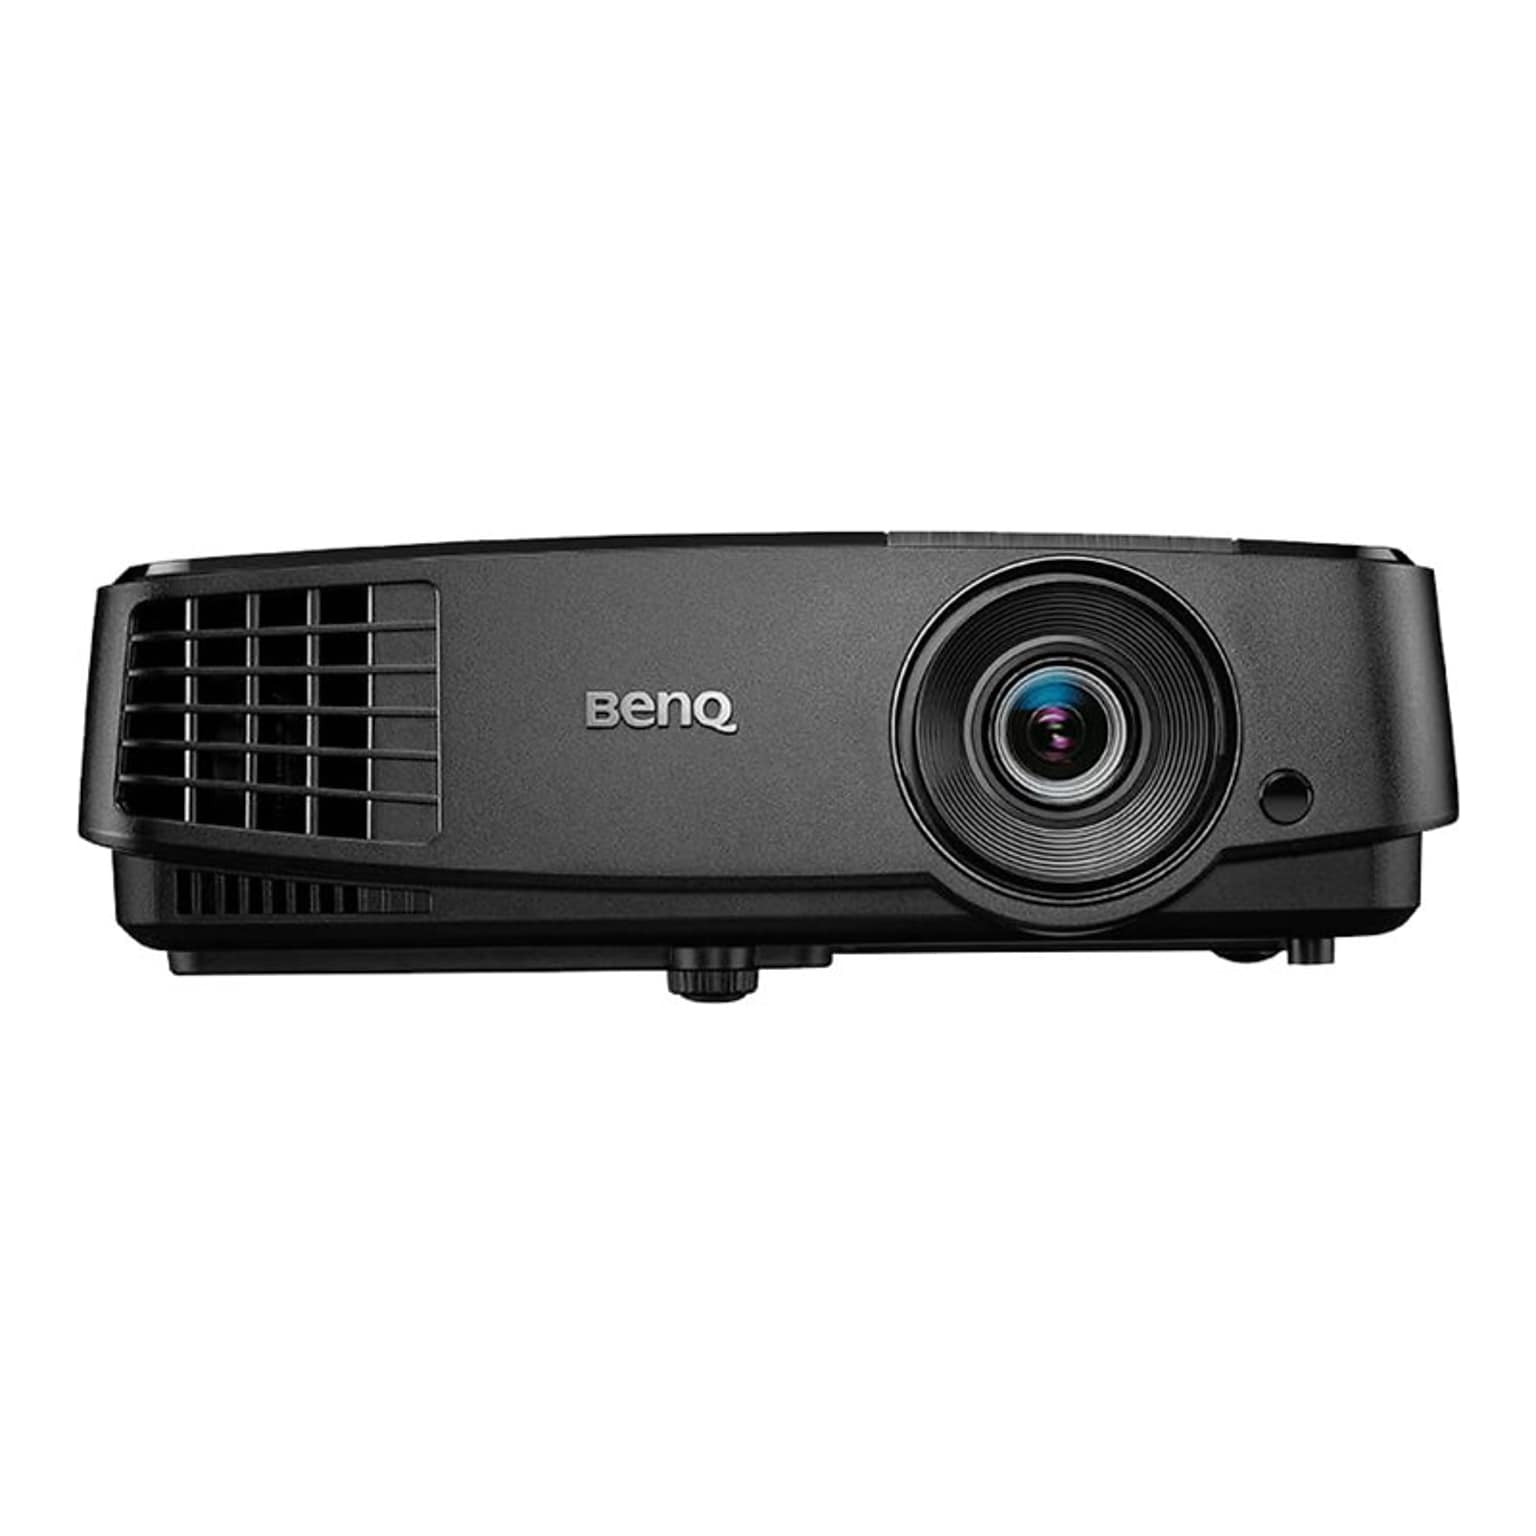 BenQ Portable DLP Home Theater Projector, Black (MS560)